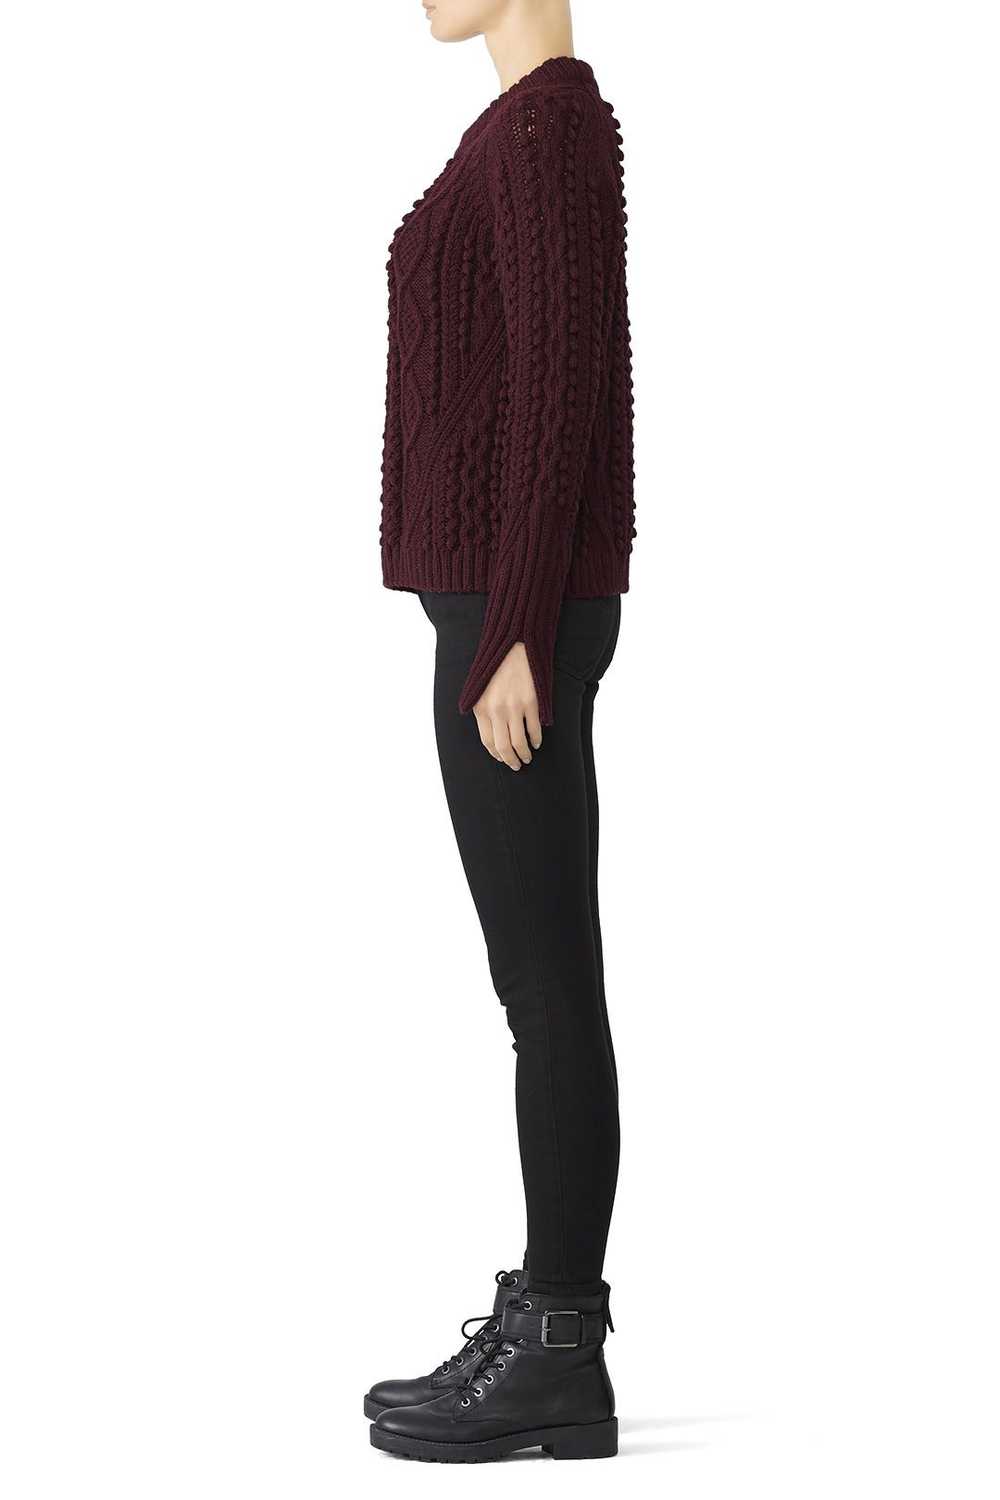 3.1 Phillip Lim Popcorn Cable Wool Pullover - image 3